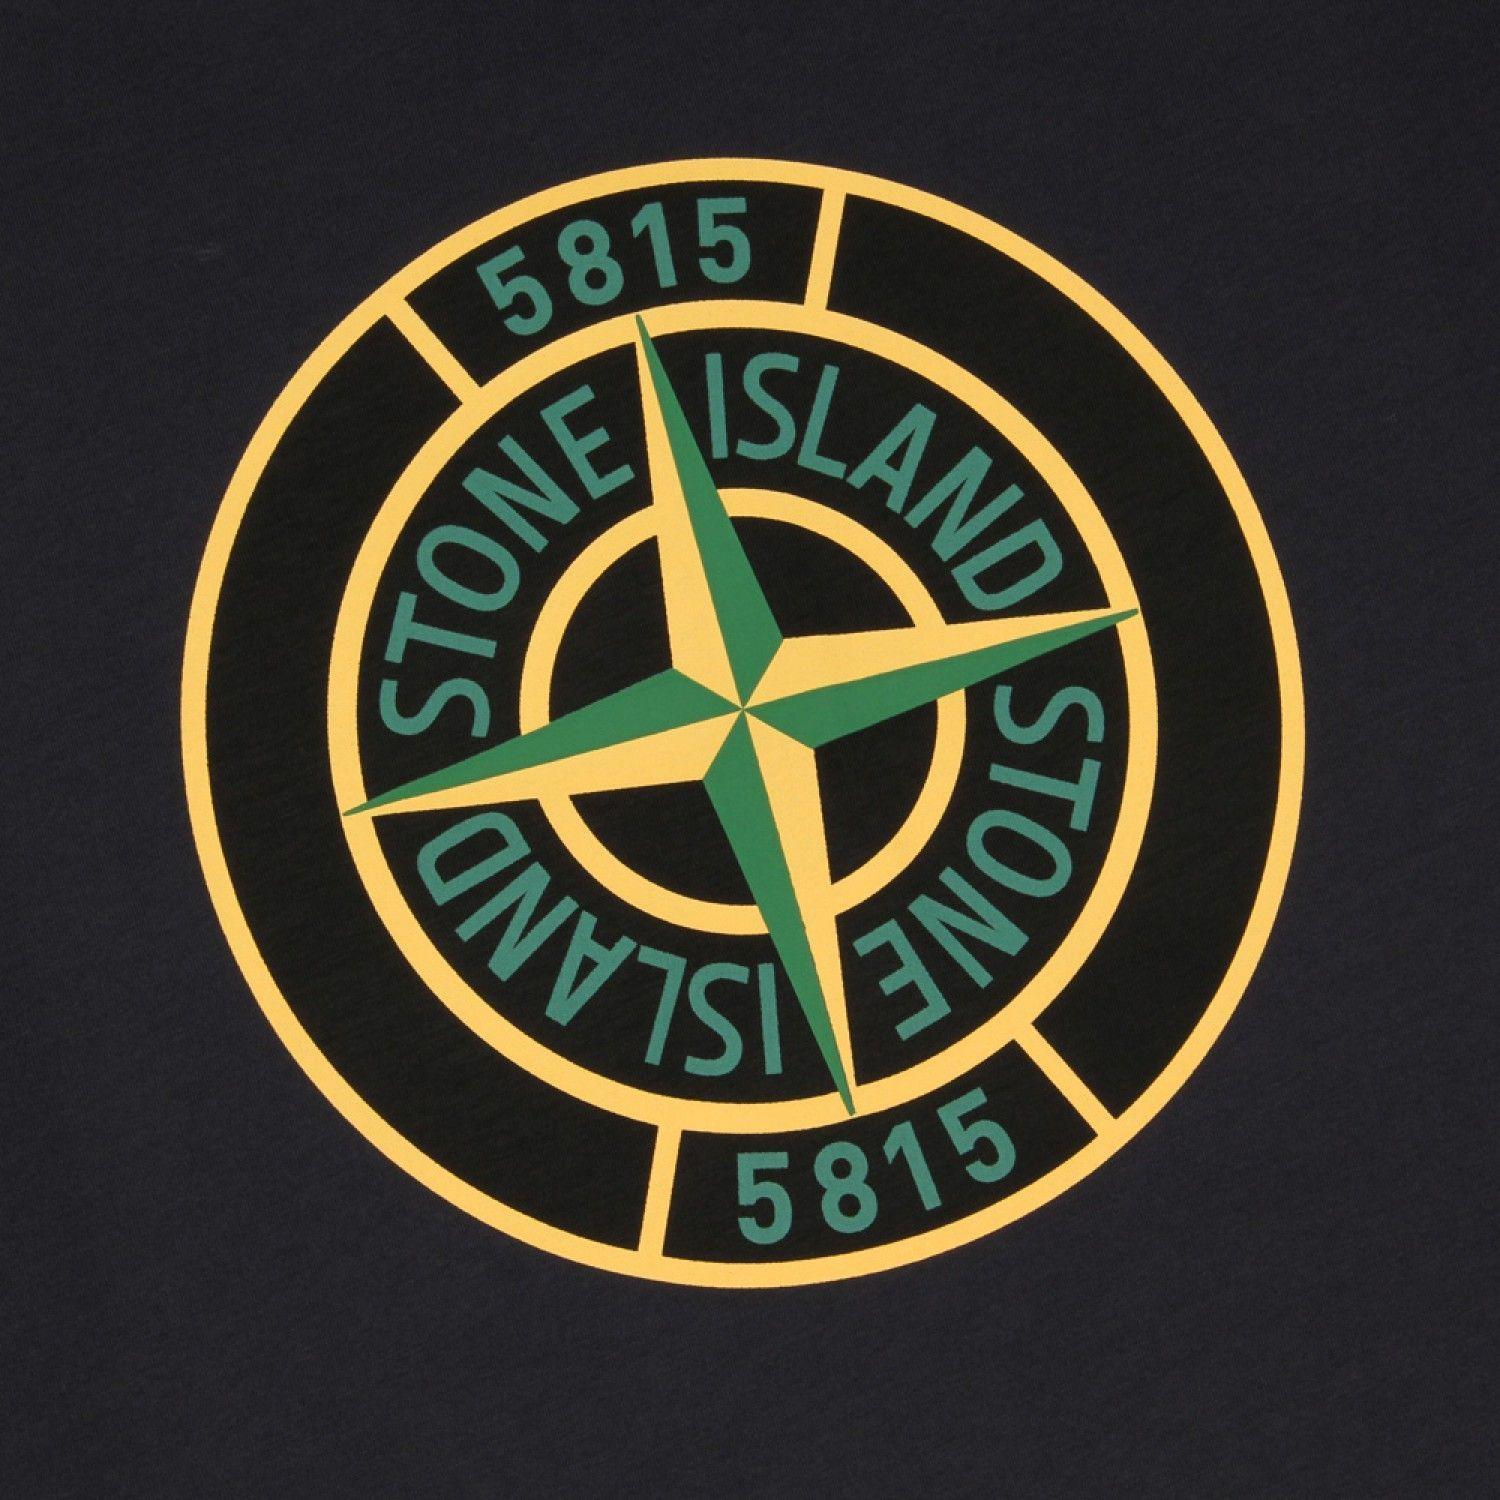 Stone Island Wallpapers - Top Free Stone Island Backgrounds ...